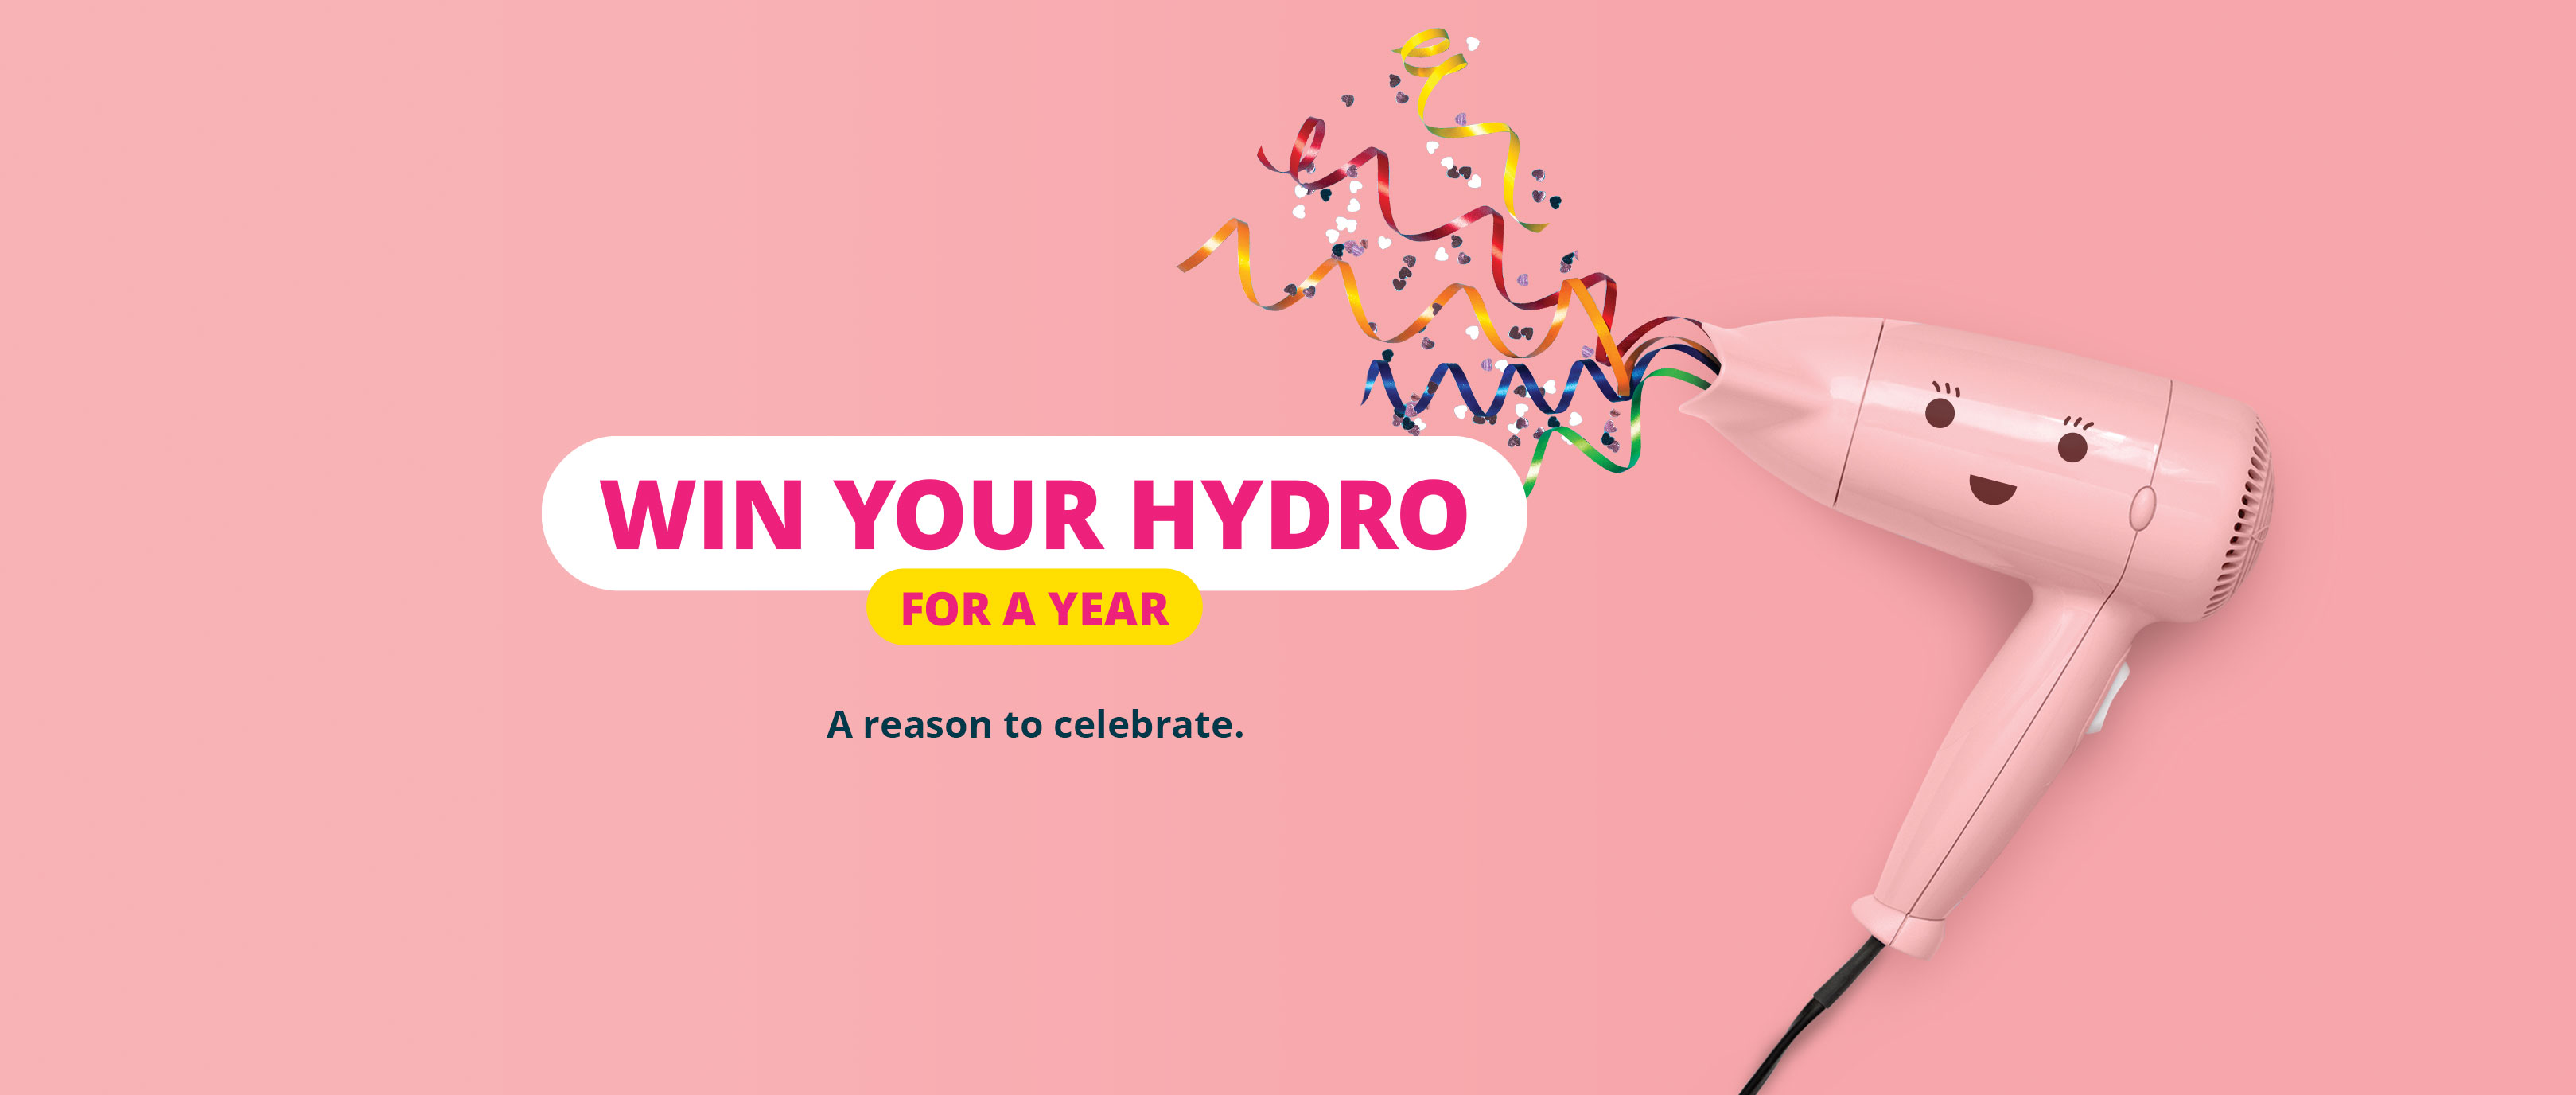 Win your Hydro for a year. A new reason to celebrate.